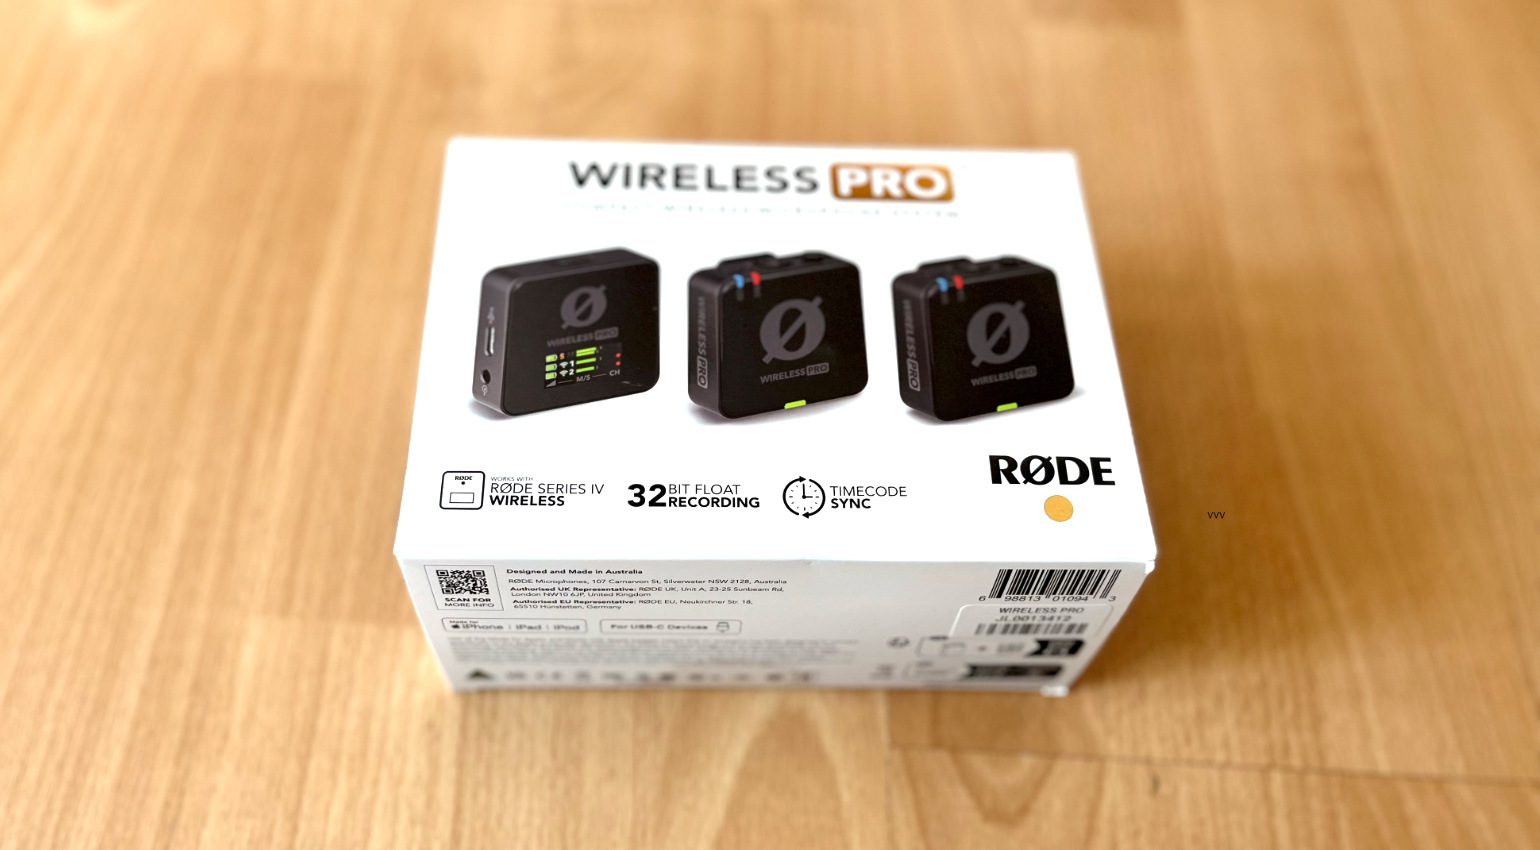 Review: RØDE Wireless PRO — AudioTechnology